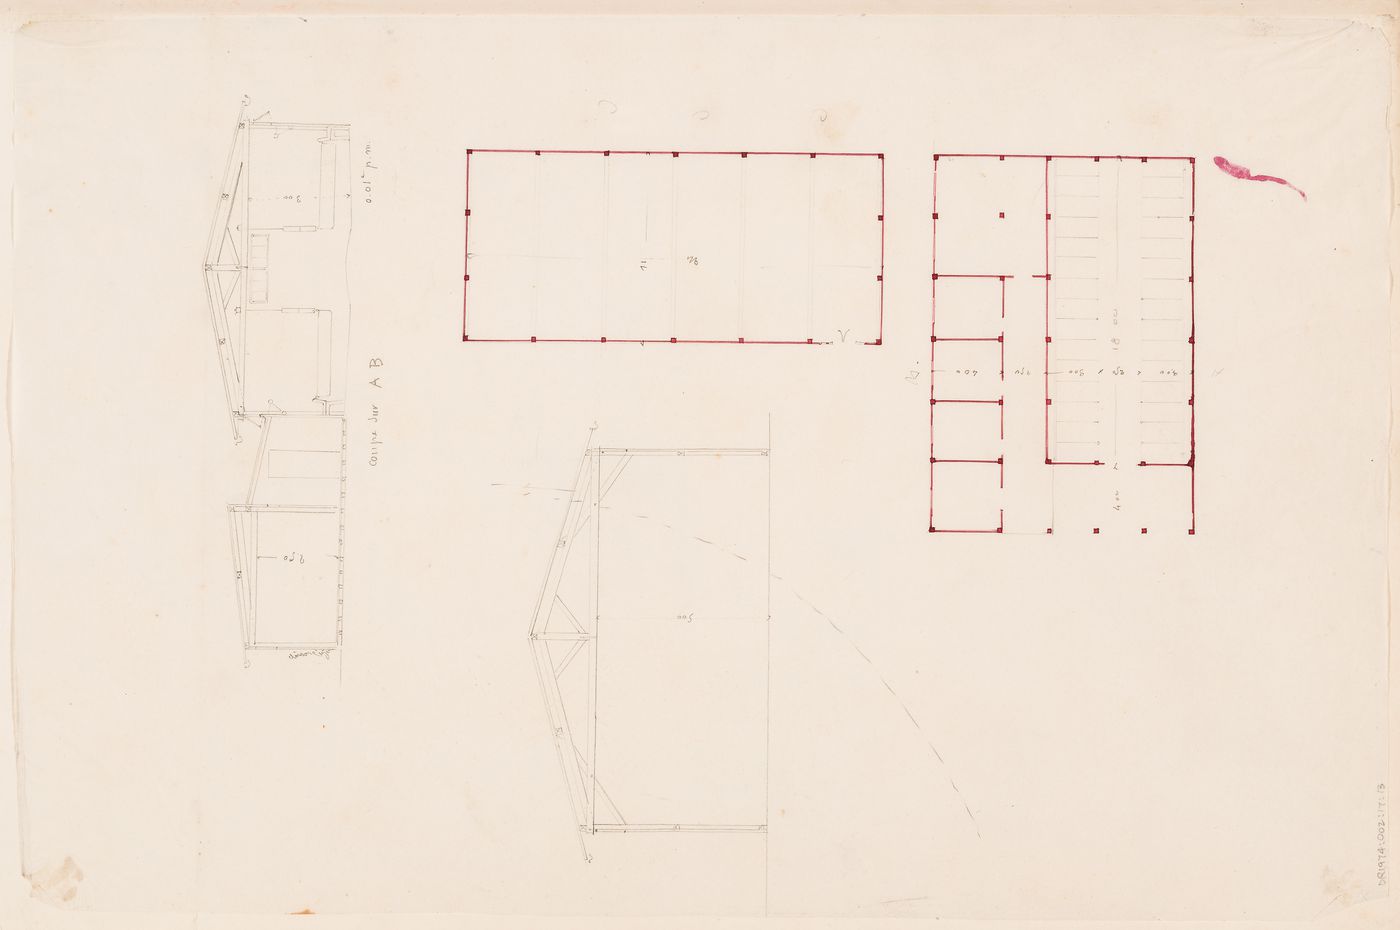 Plans and sections, possibly for stables